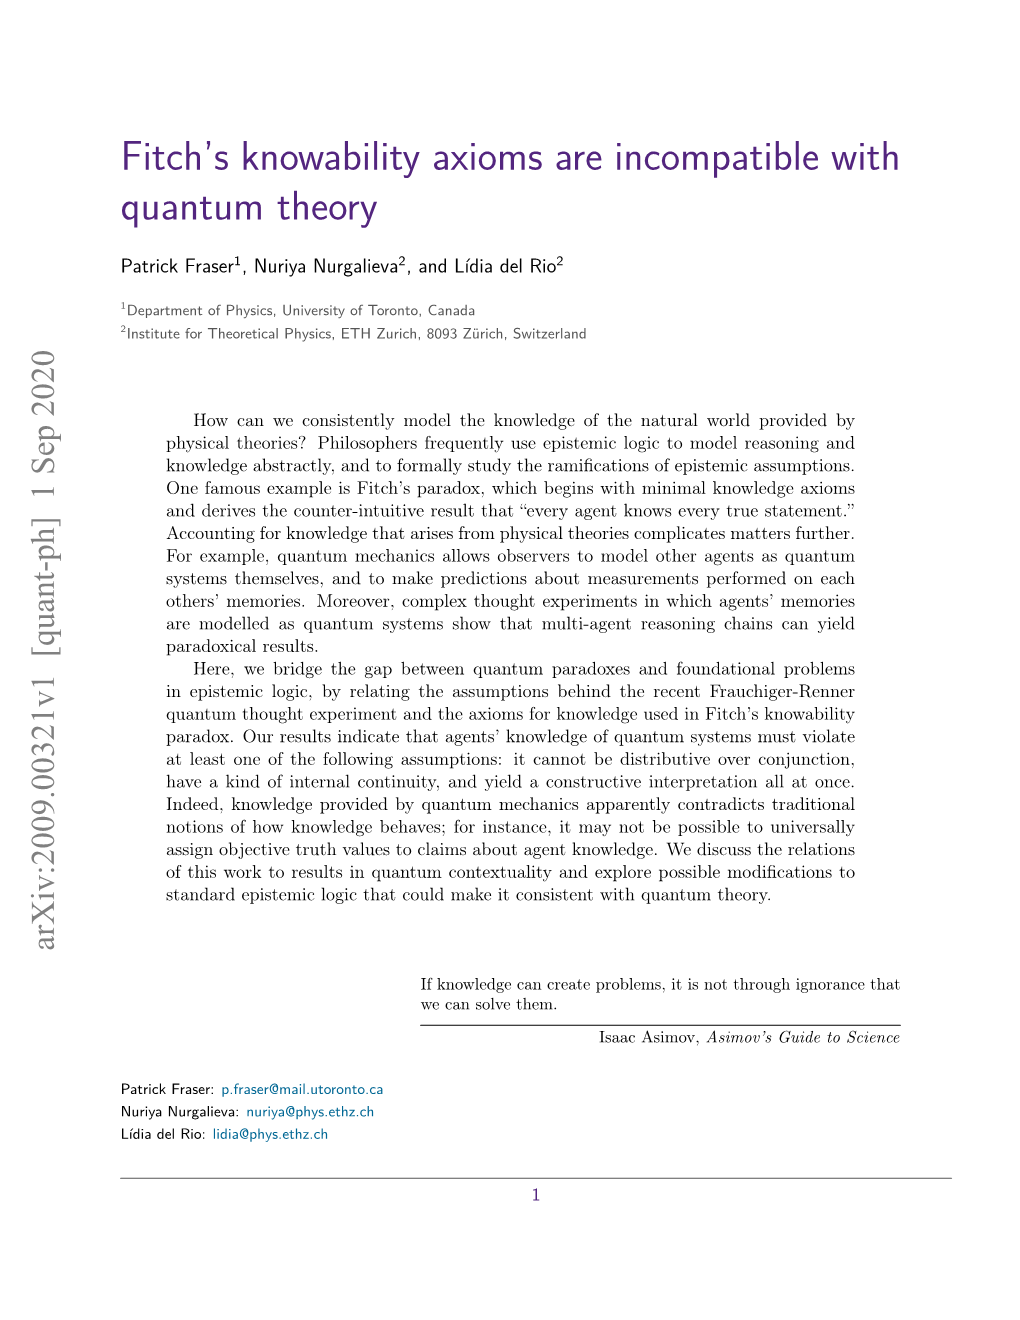 Fitch's Knowability Axioms Are Incompatible with Quantum Theory